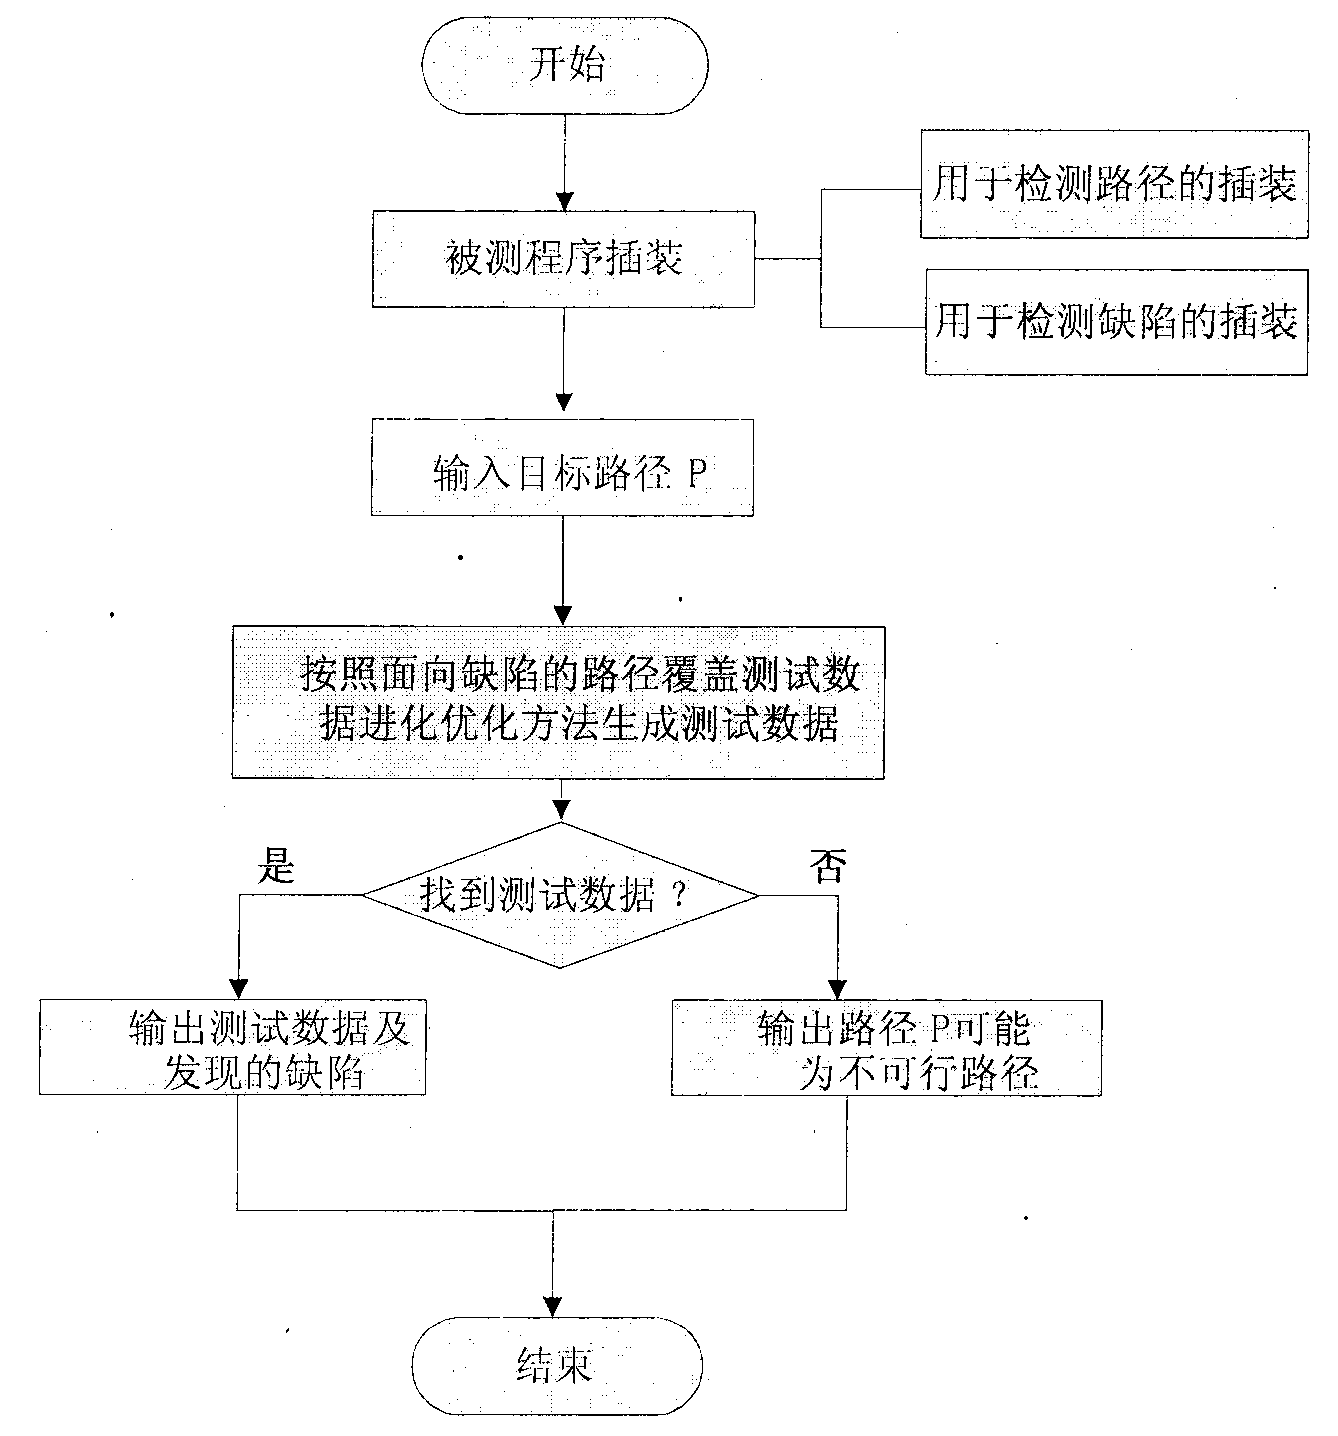 Method for evolving and generating path coverage test data facing defects